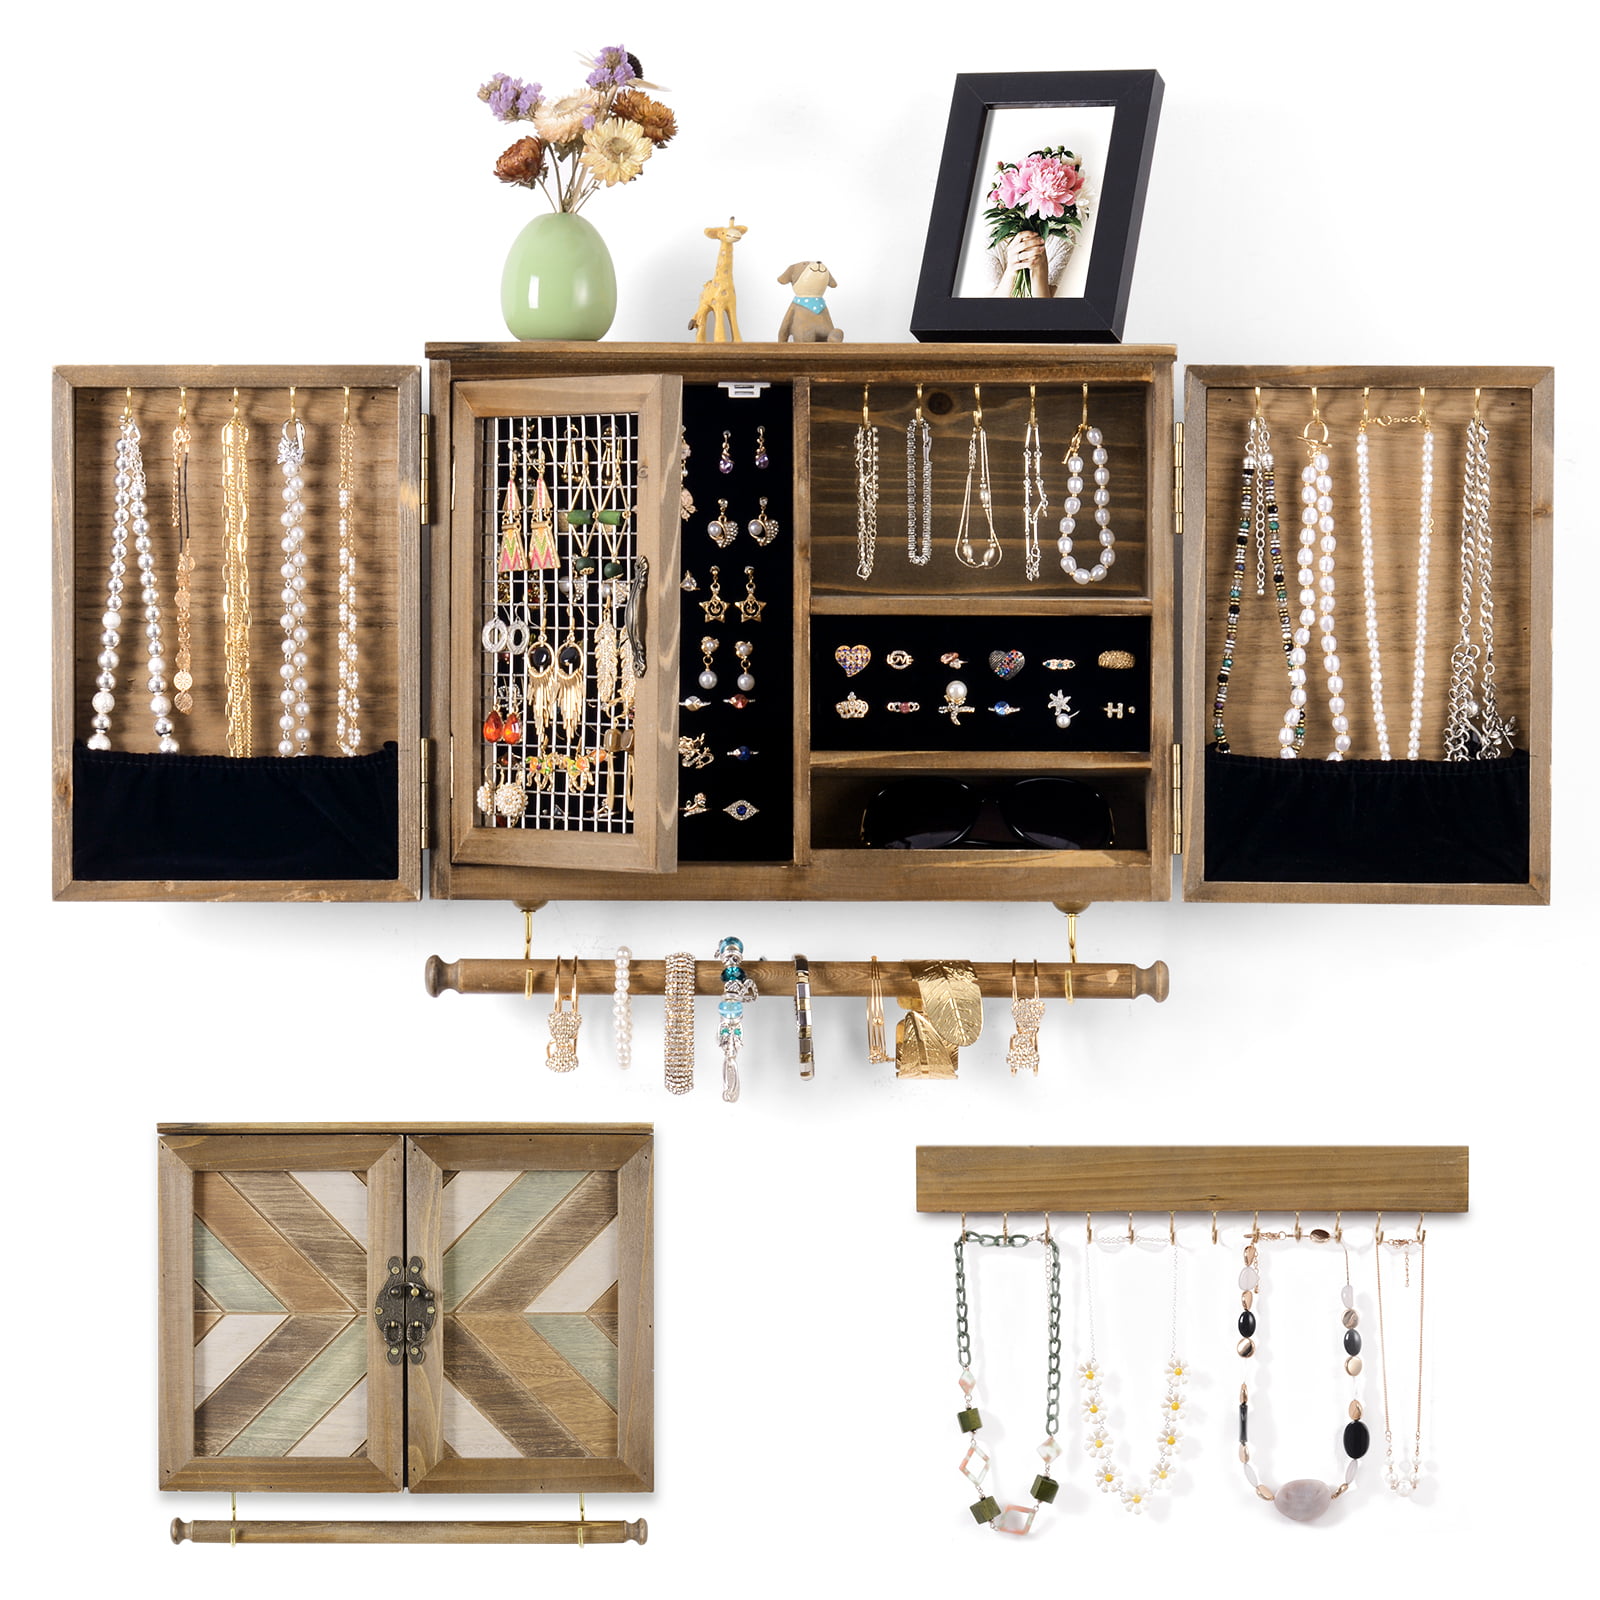 Upcycled Toy Hanging Jewelry Organizers